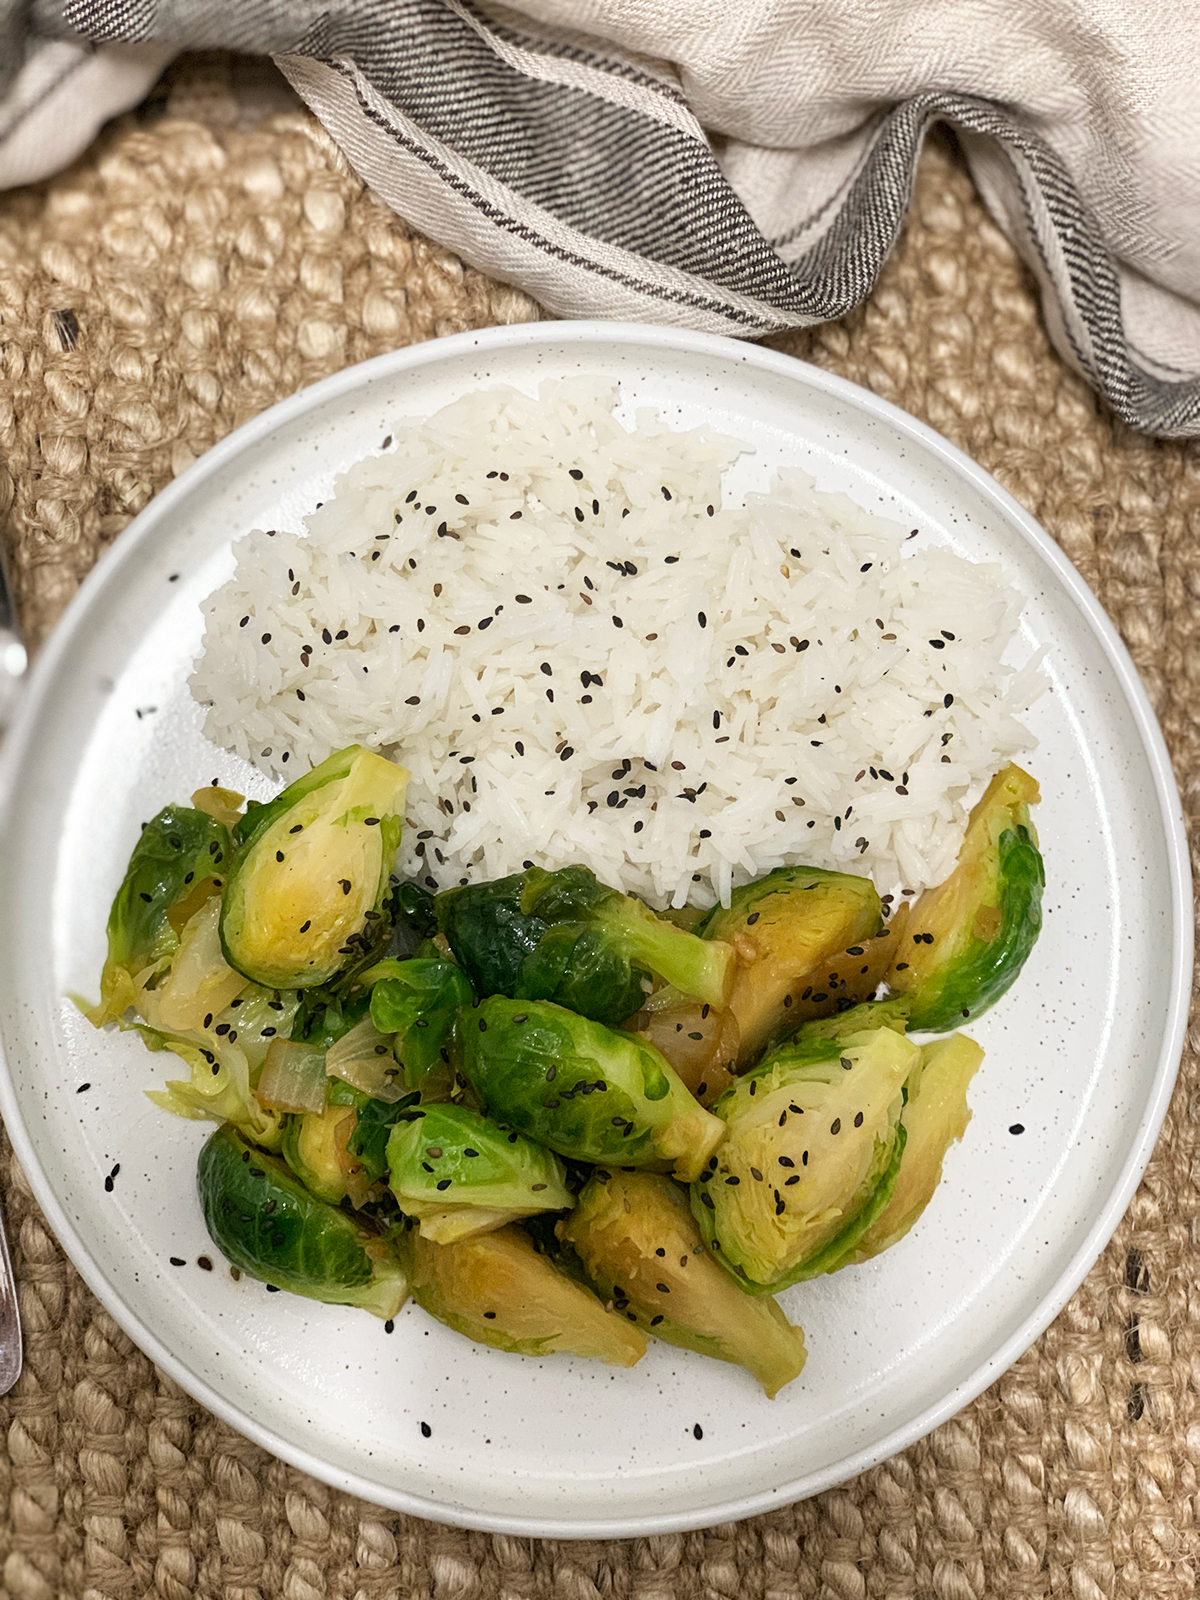 Brussels sprouts sauteed in garlic and soy served with rice and garnished with black sesame seeds